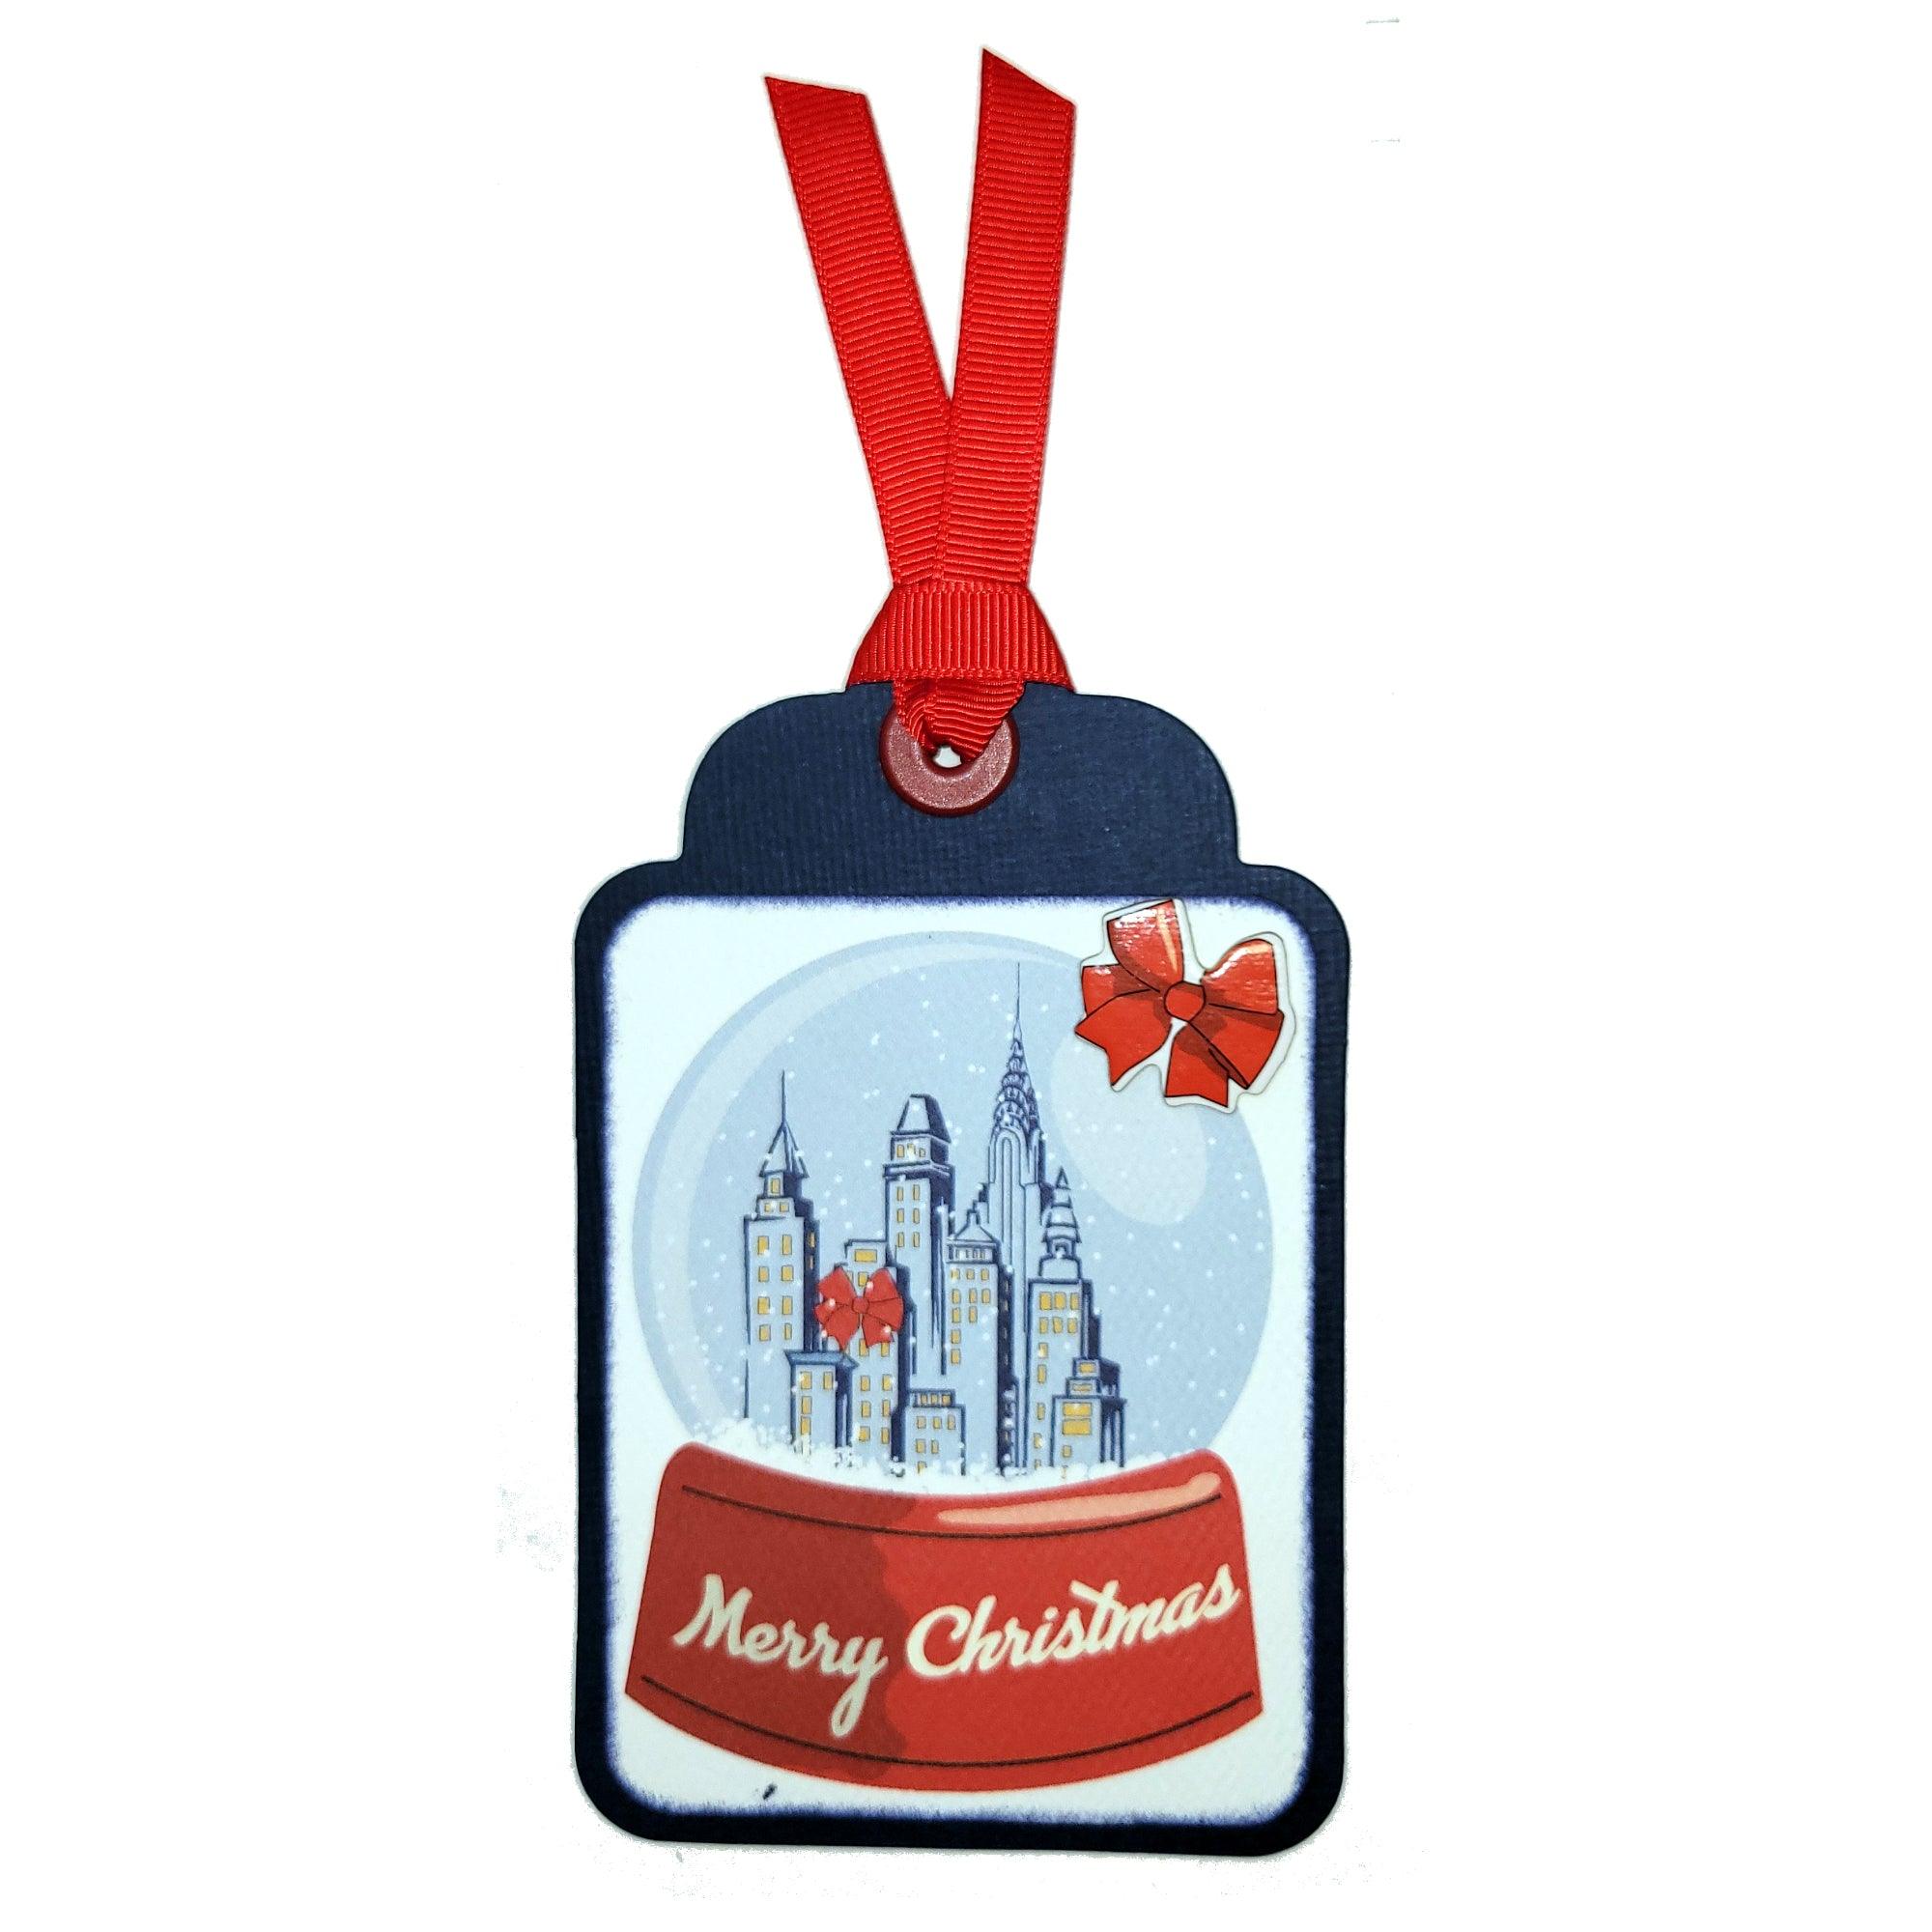 Christmas Collection Merry Christmas Snow Globe 3 x 4 Scrapbook Tag Embellishment by SSC Designs